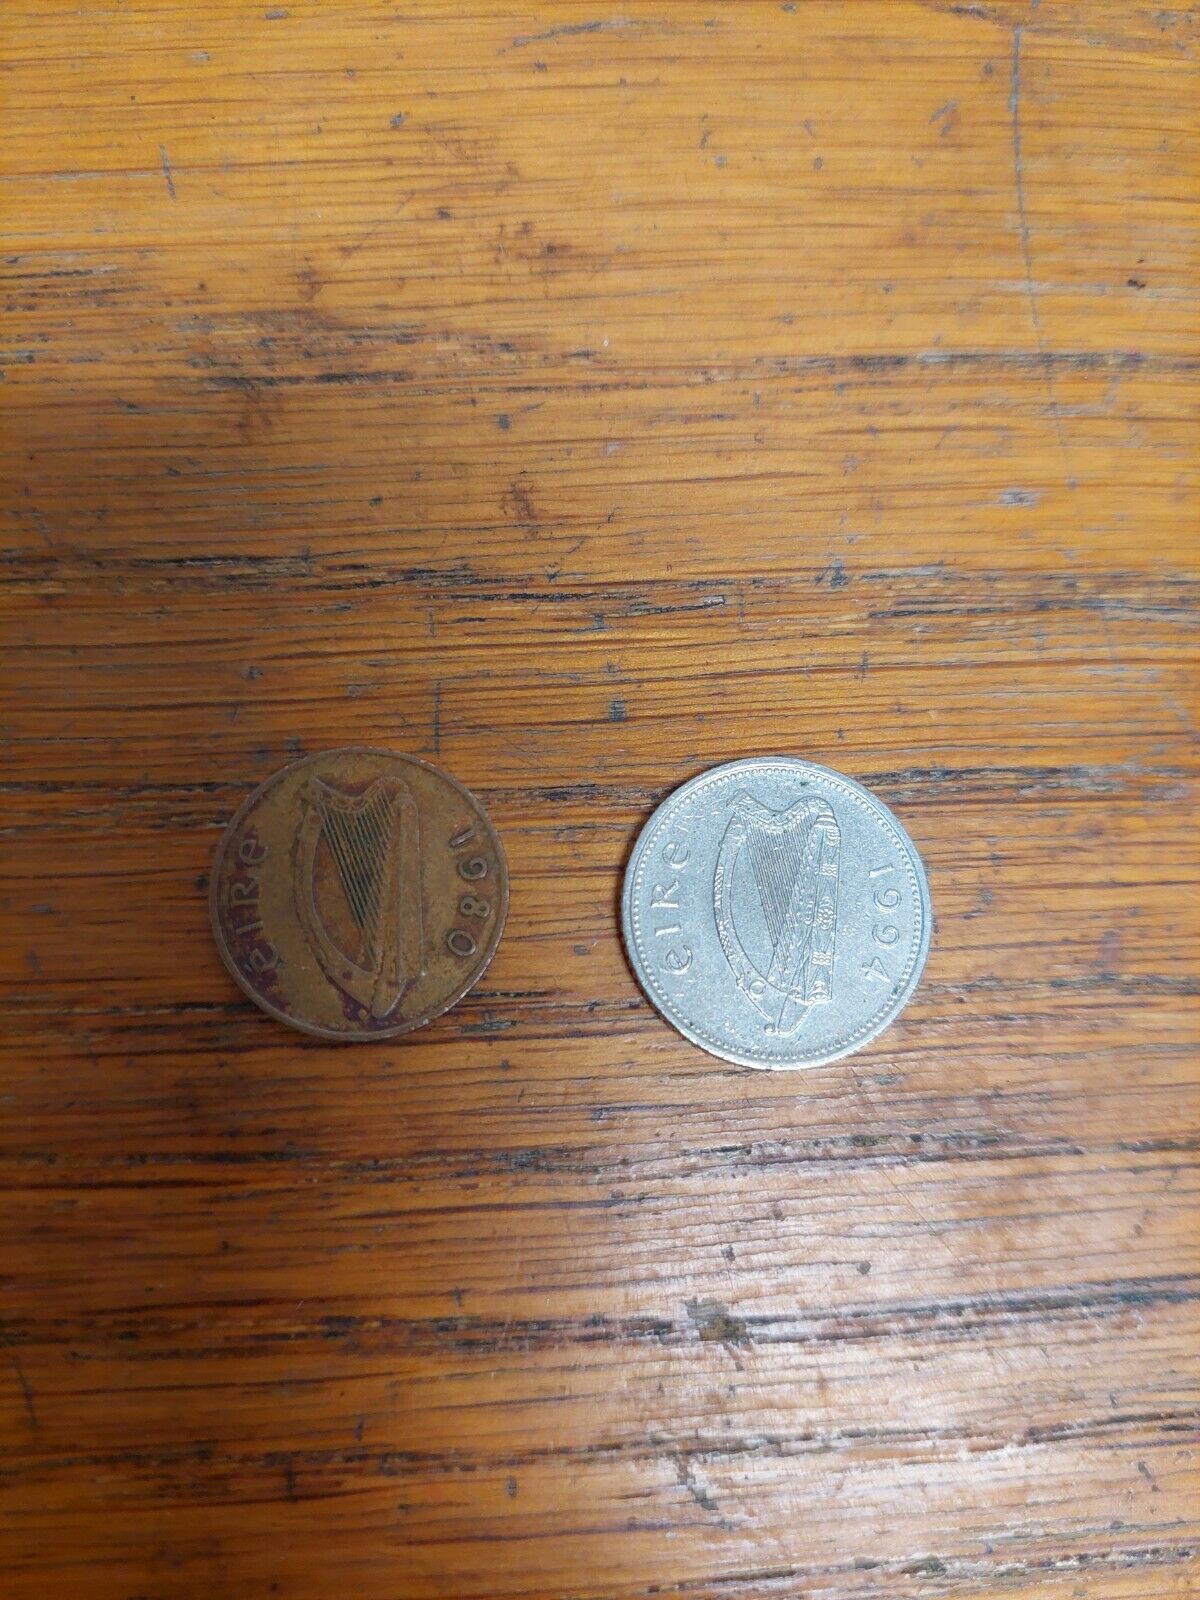 Irish Coin Lot Of Two 10 Pence And 1 Pence